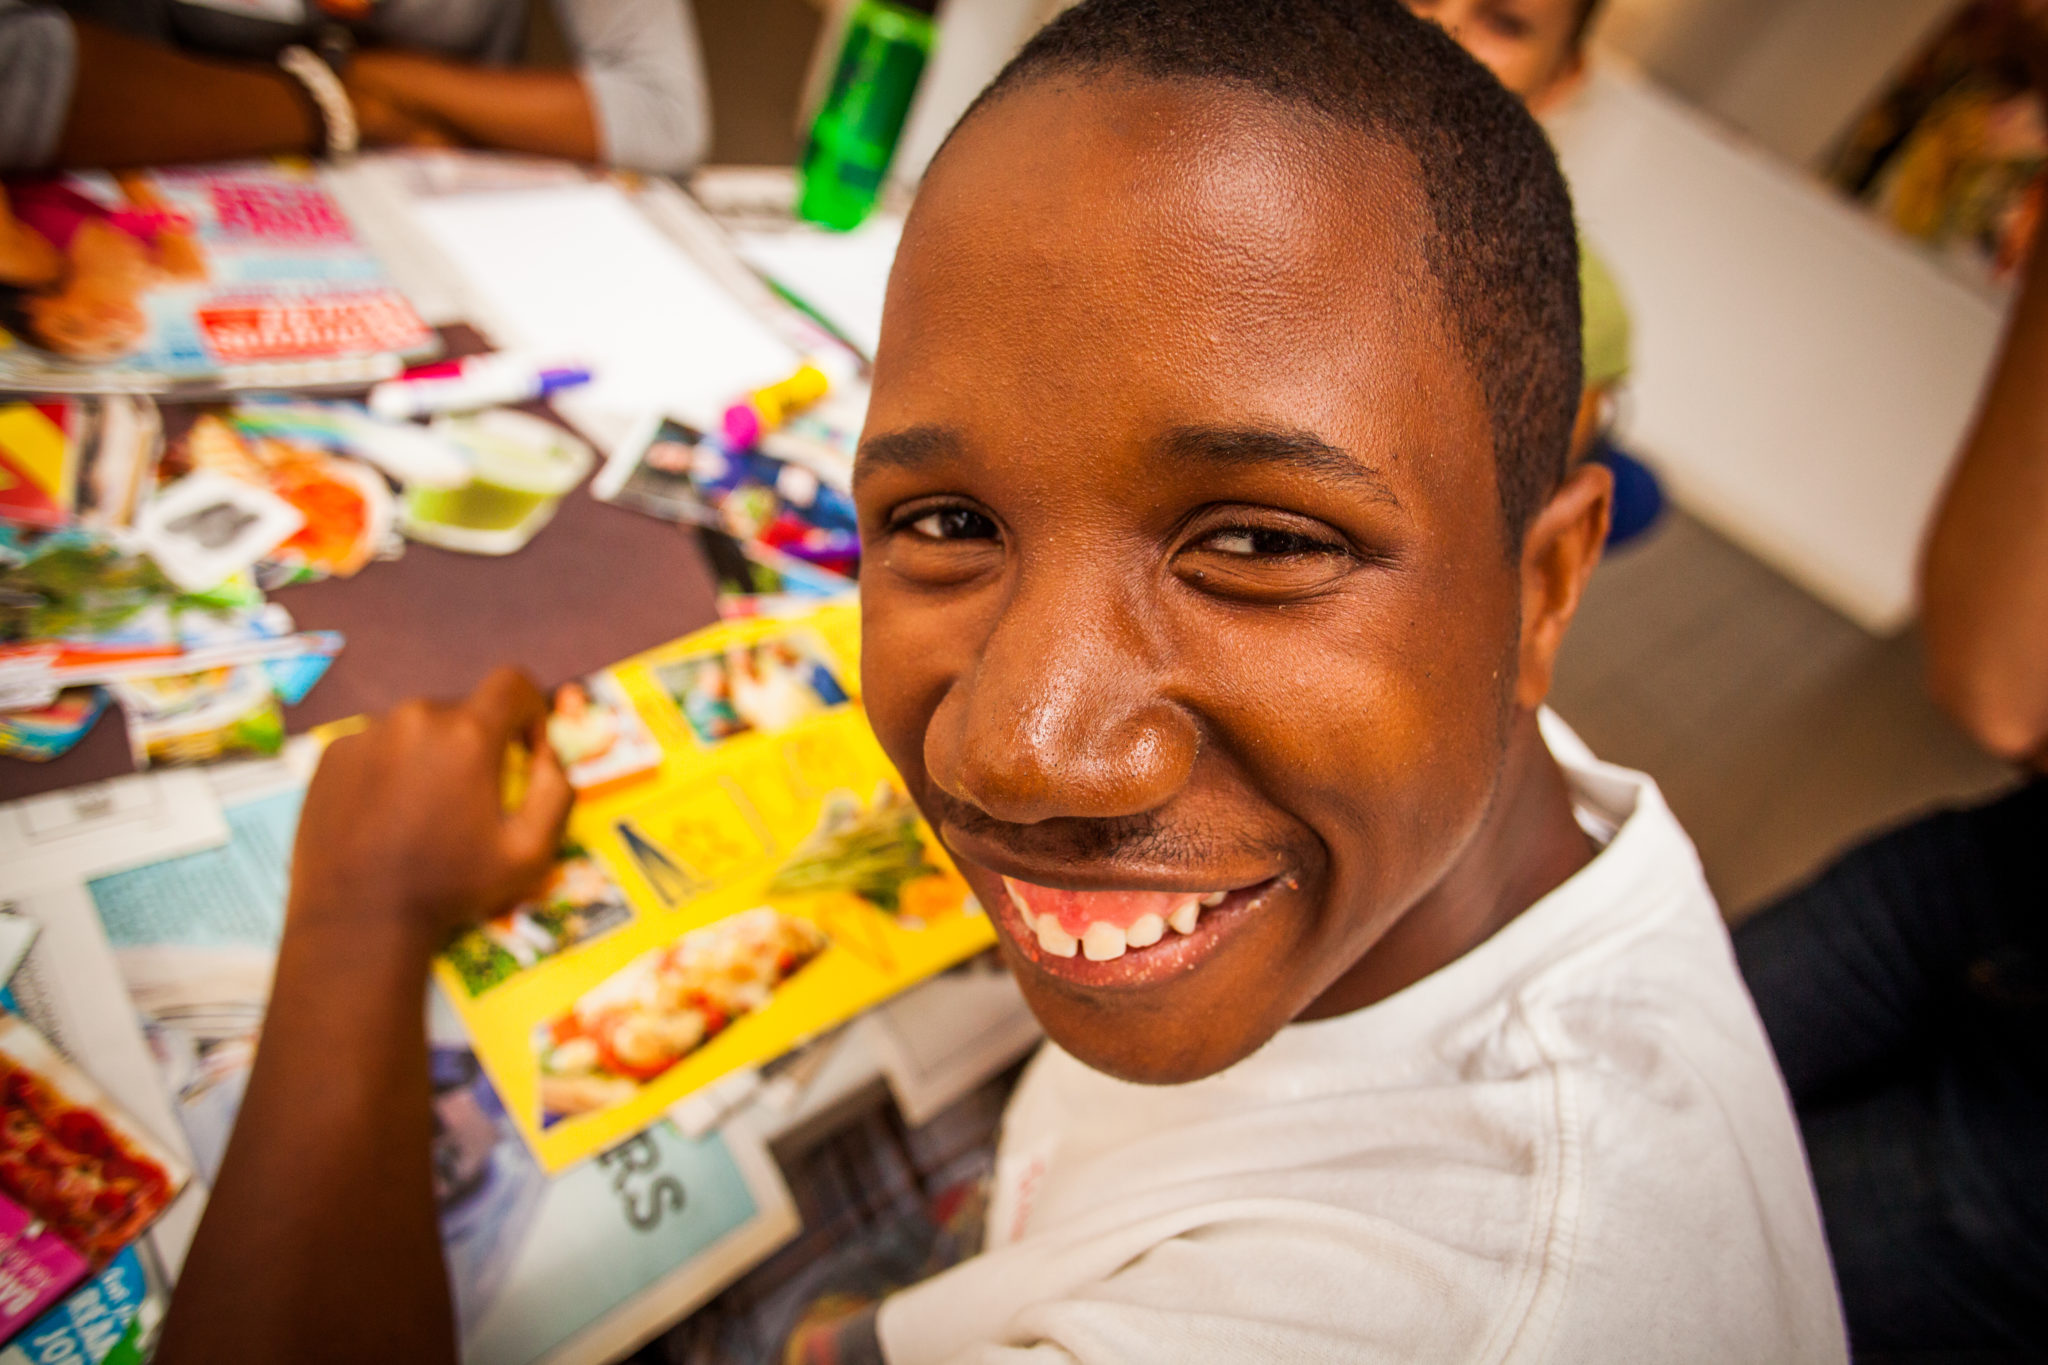 A young man smiles at the camera as he works on a collage.